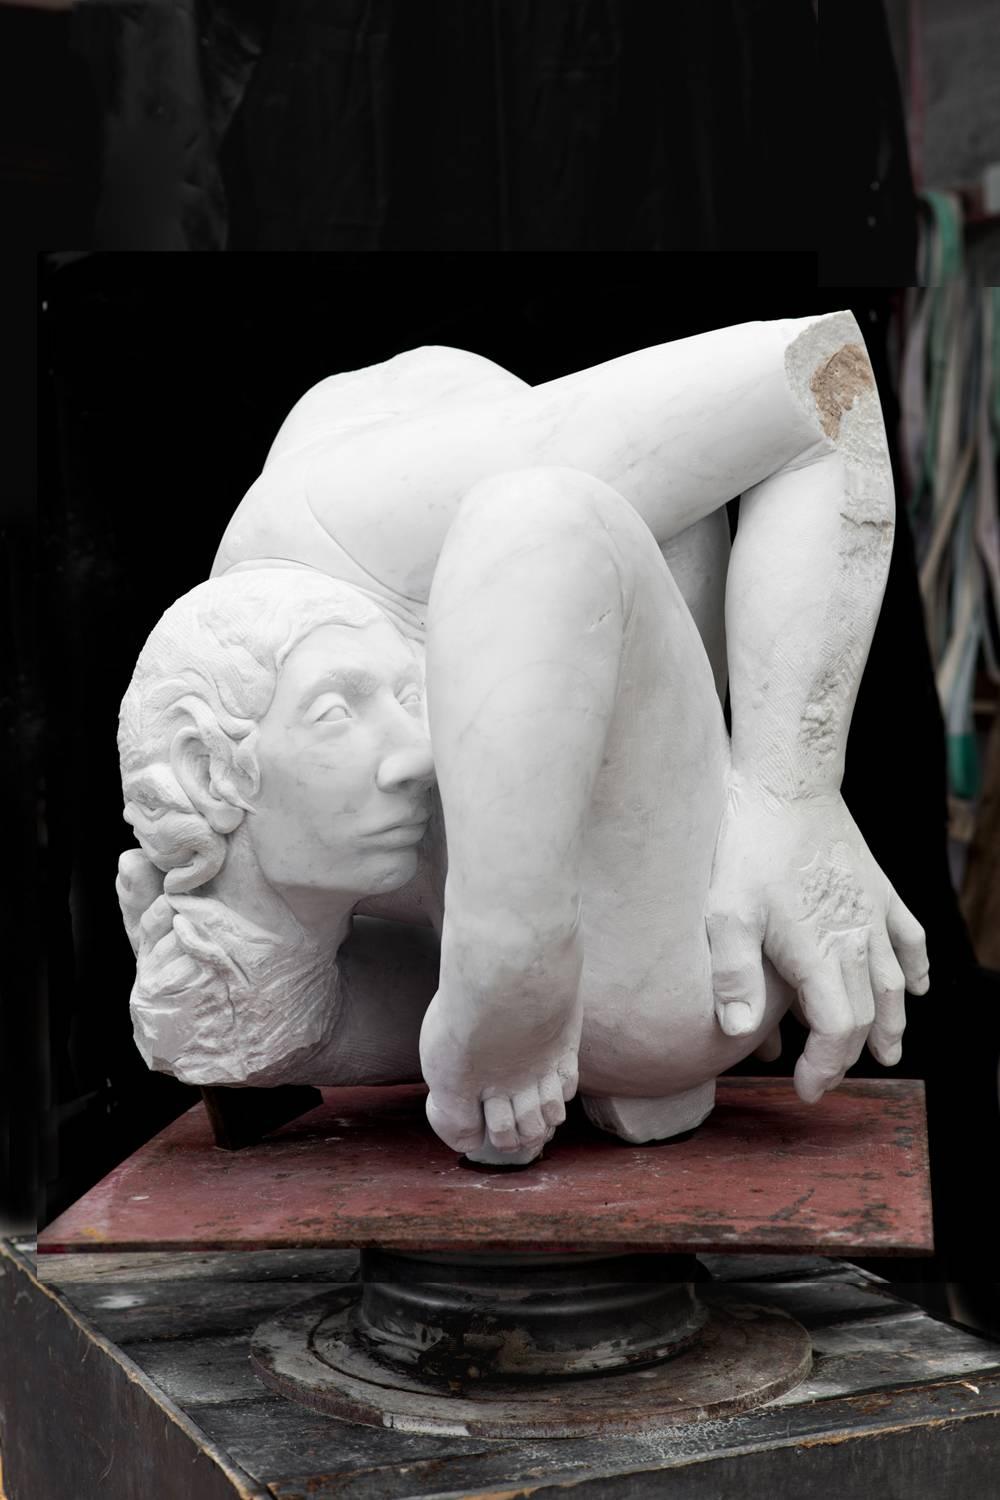 Embrione - hand carved abstract figurative nude white Carrara marble sculpture - Sculpture by Lorenzo Vignoli